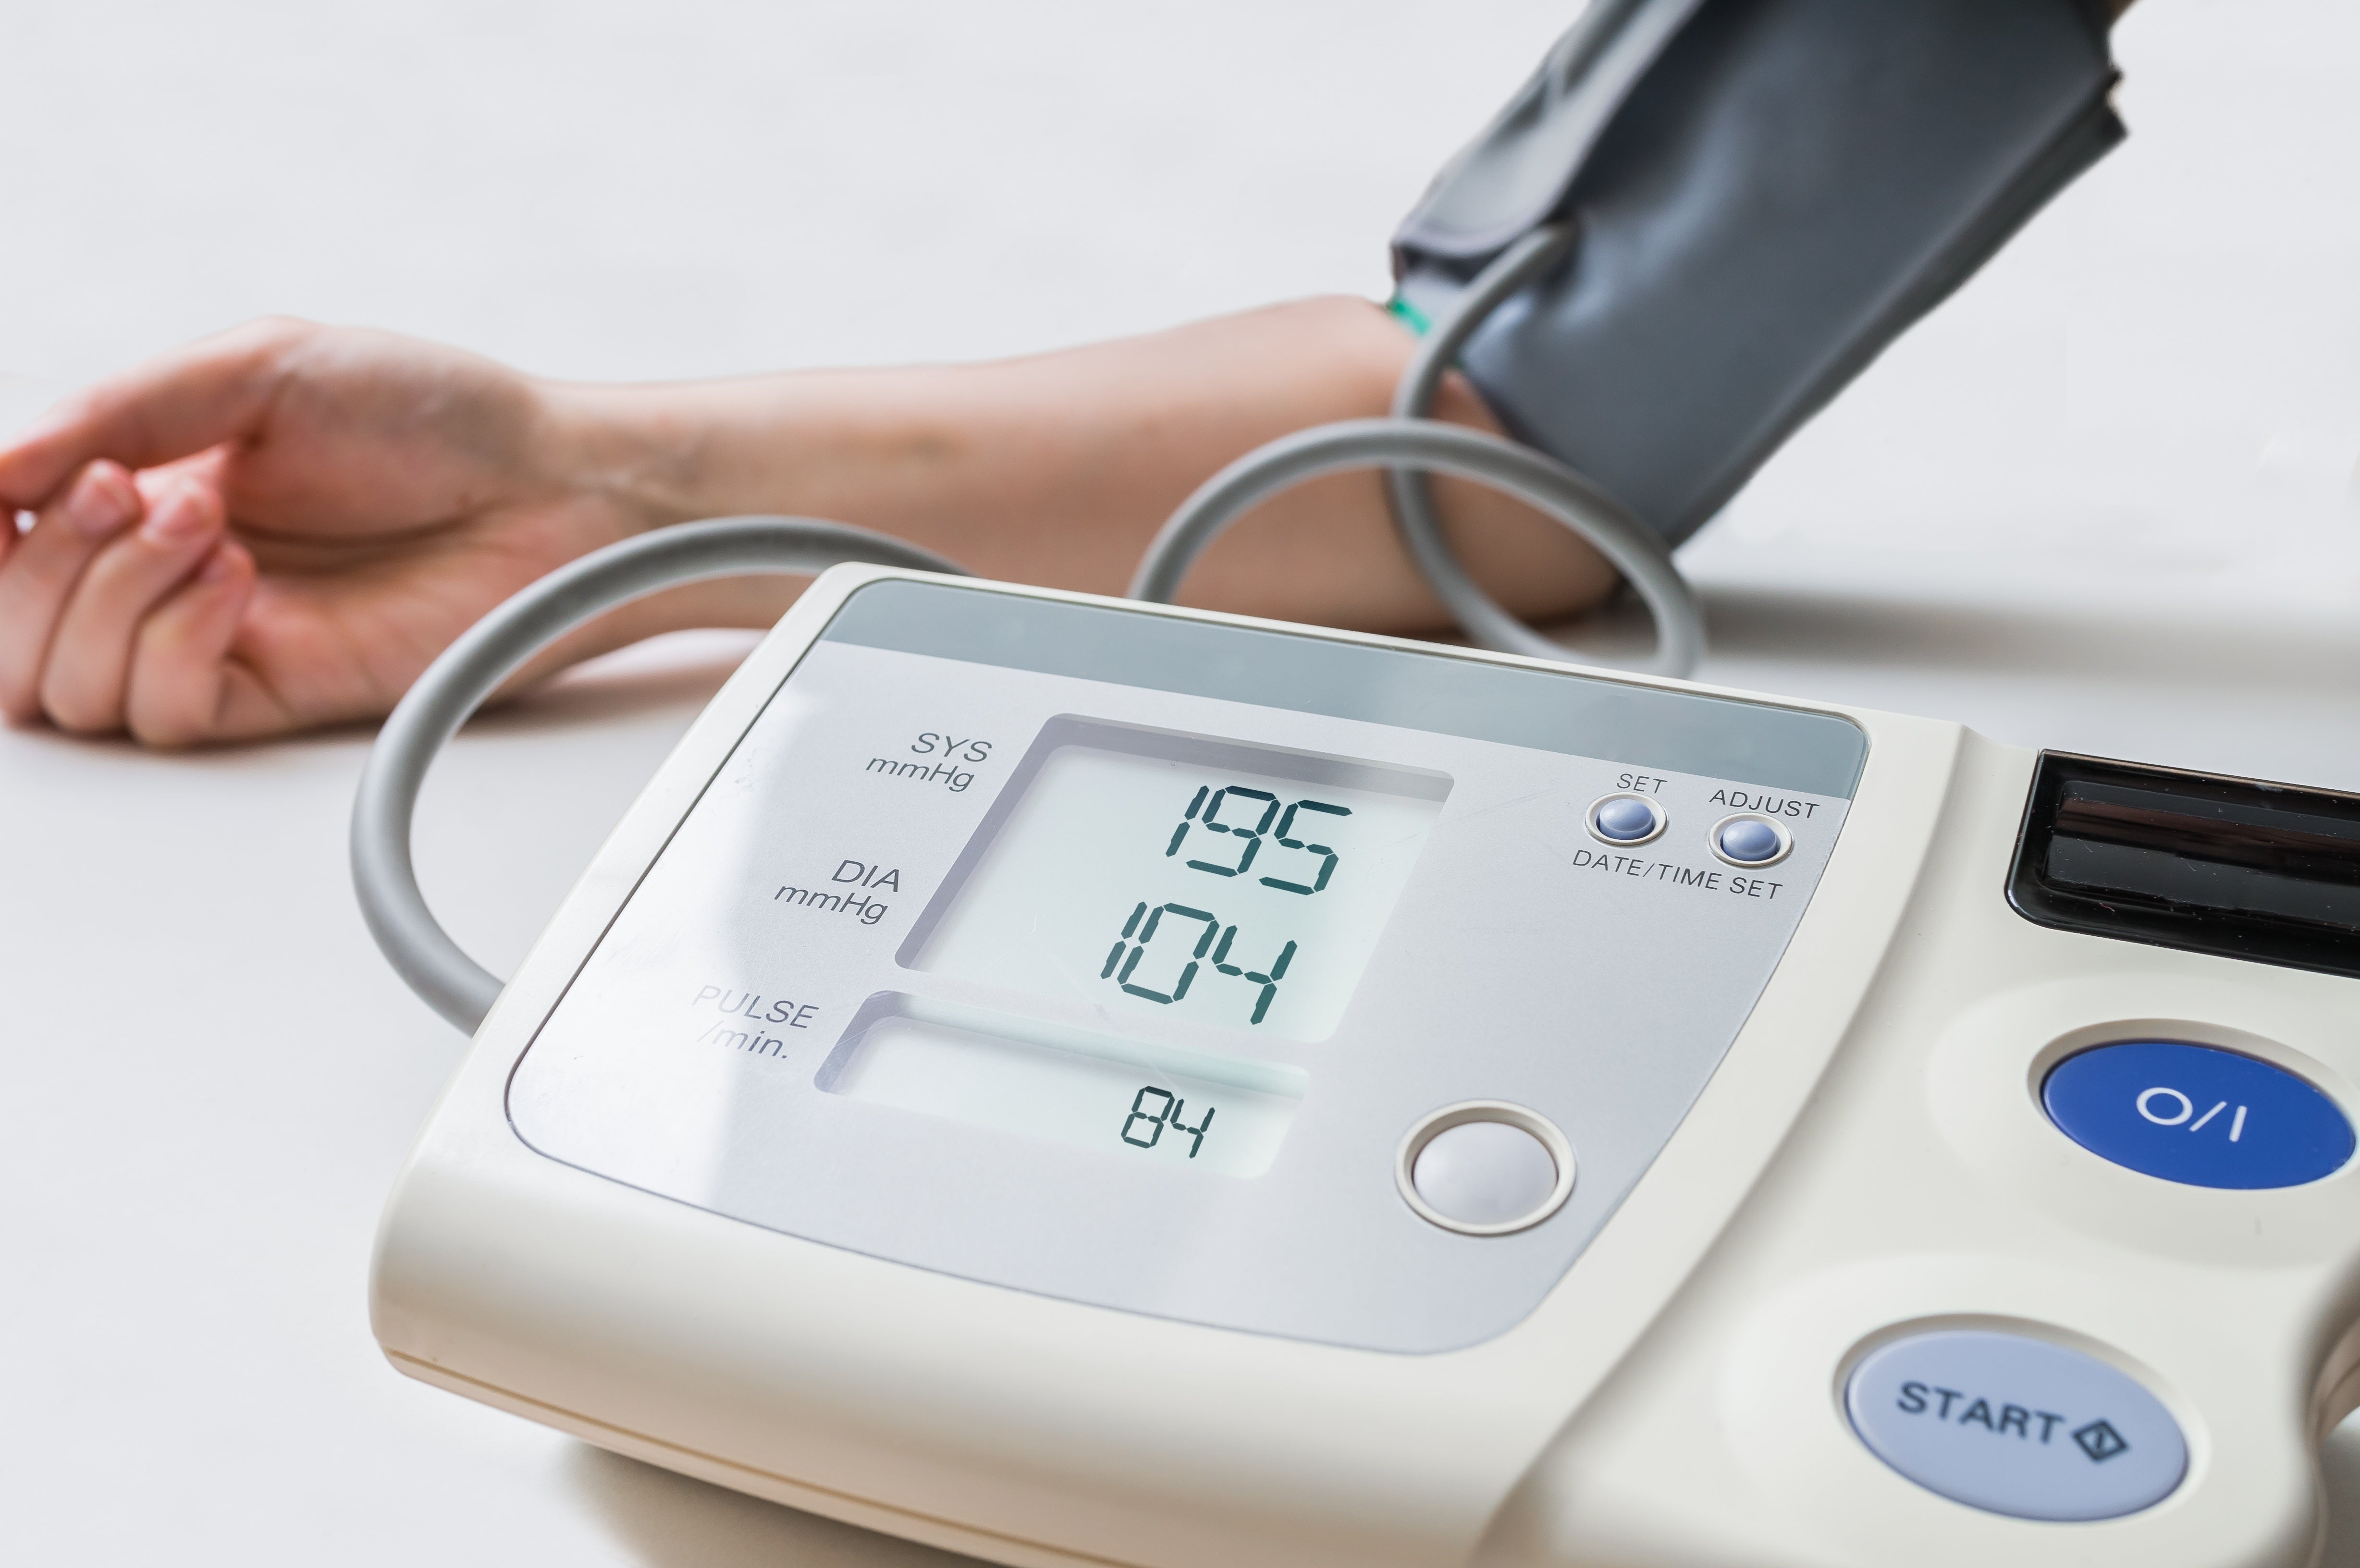 Do You Need to Monitor Your Blood Pressure at Home?